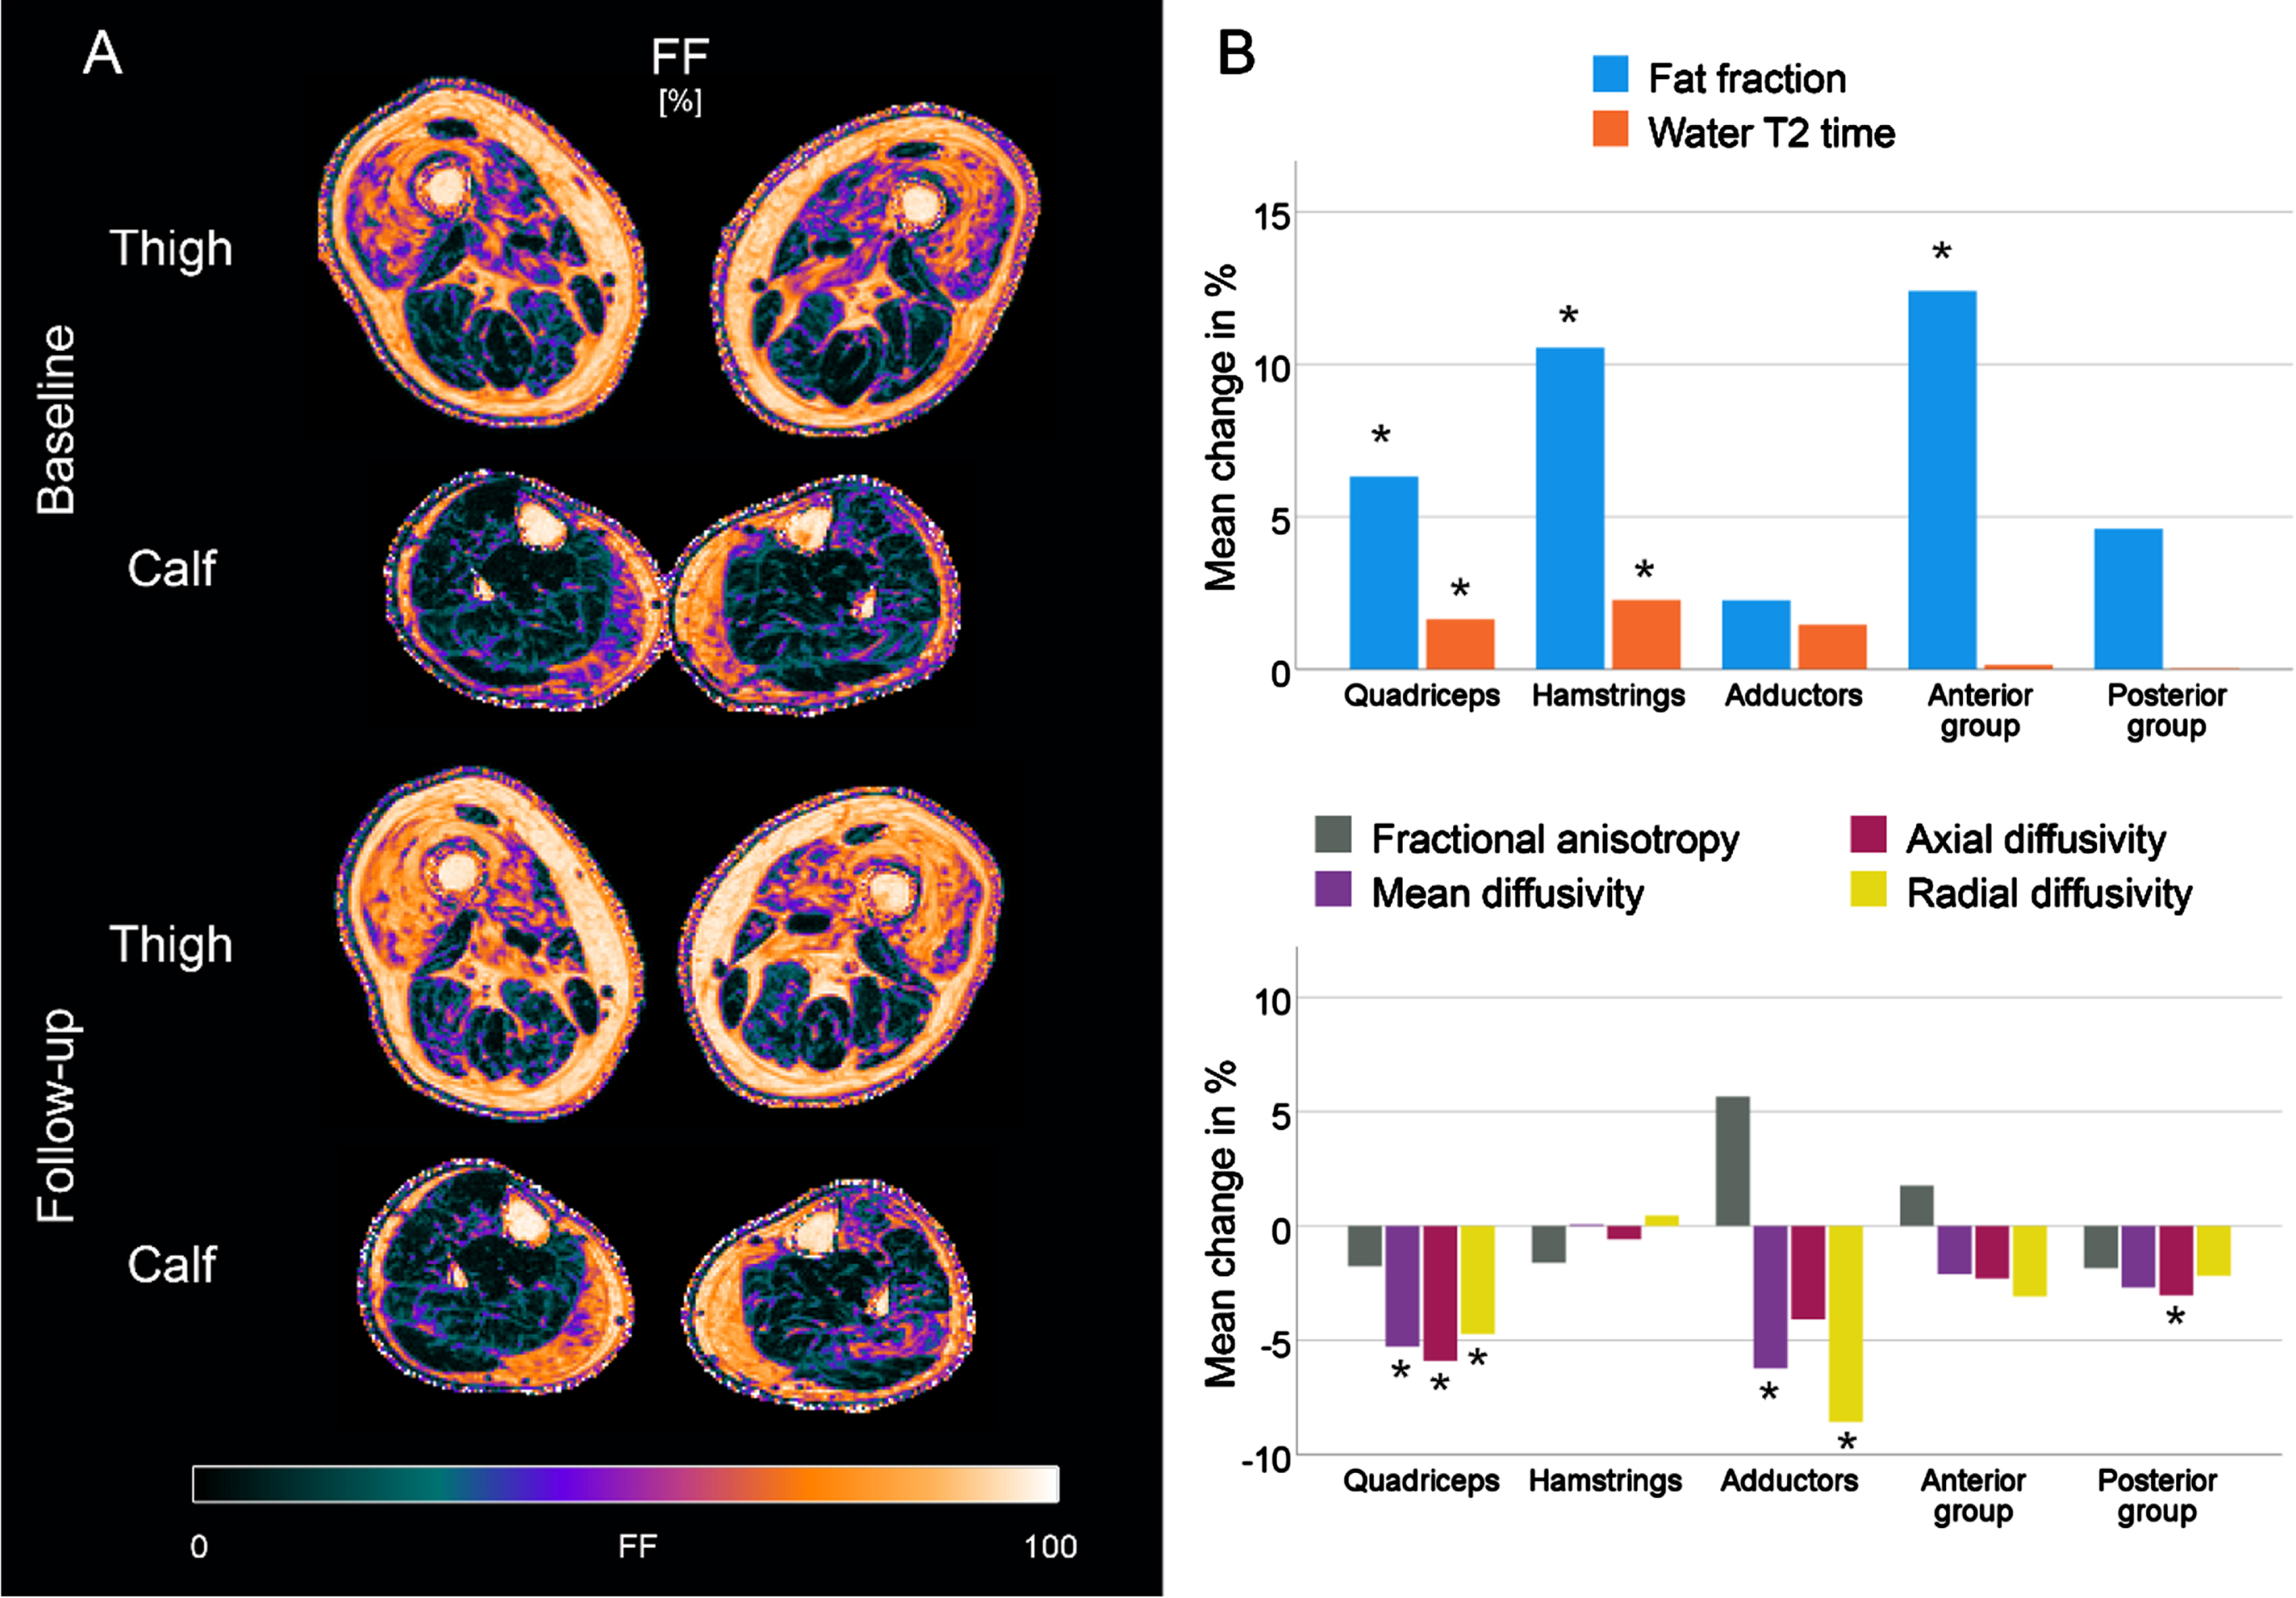 Fat fraction (FF) maps of a representative patient with sporadic inclusion body myositis (sIBM) at baseline and follow-up (A). Bar plots showing the relative mean changes of qMRI metrics in IBM patients between baseline and follow-up, normalized to the mean of both measurements. *adjusted p < 0.05.